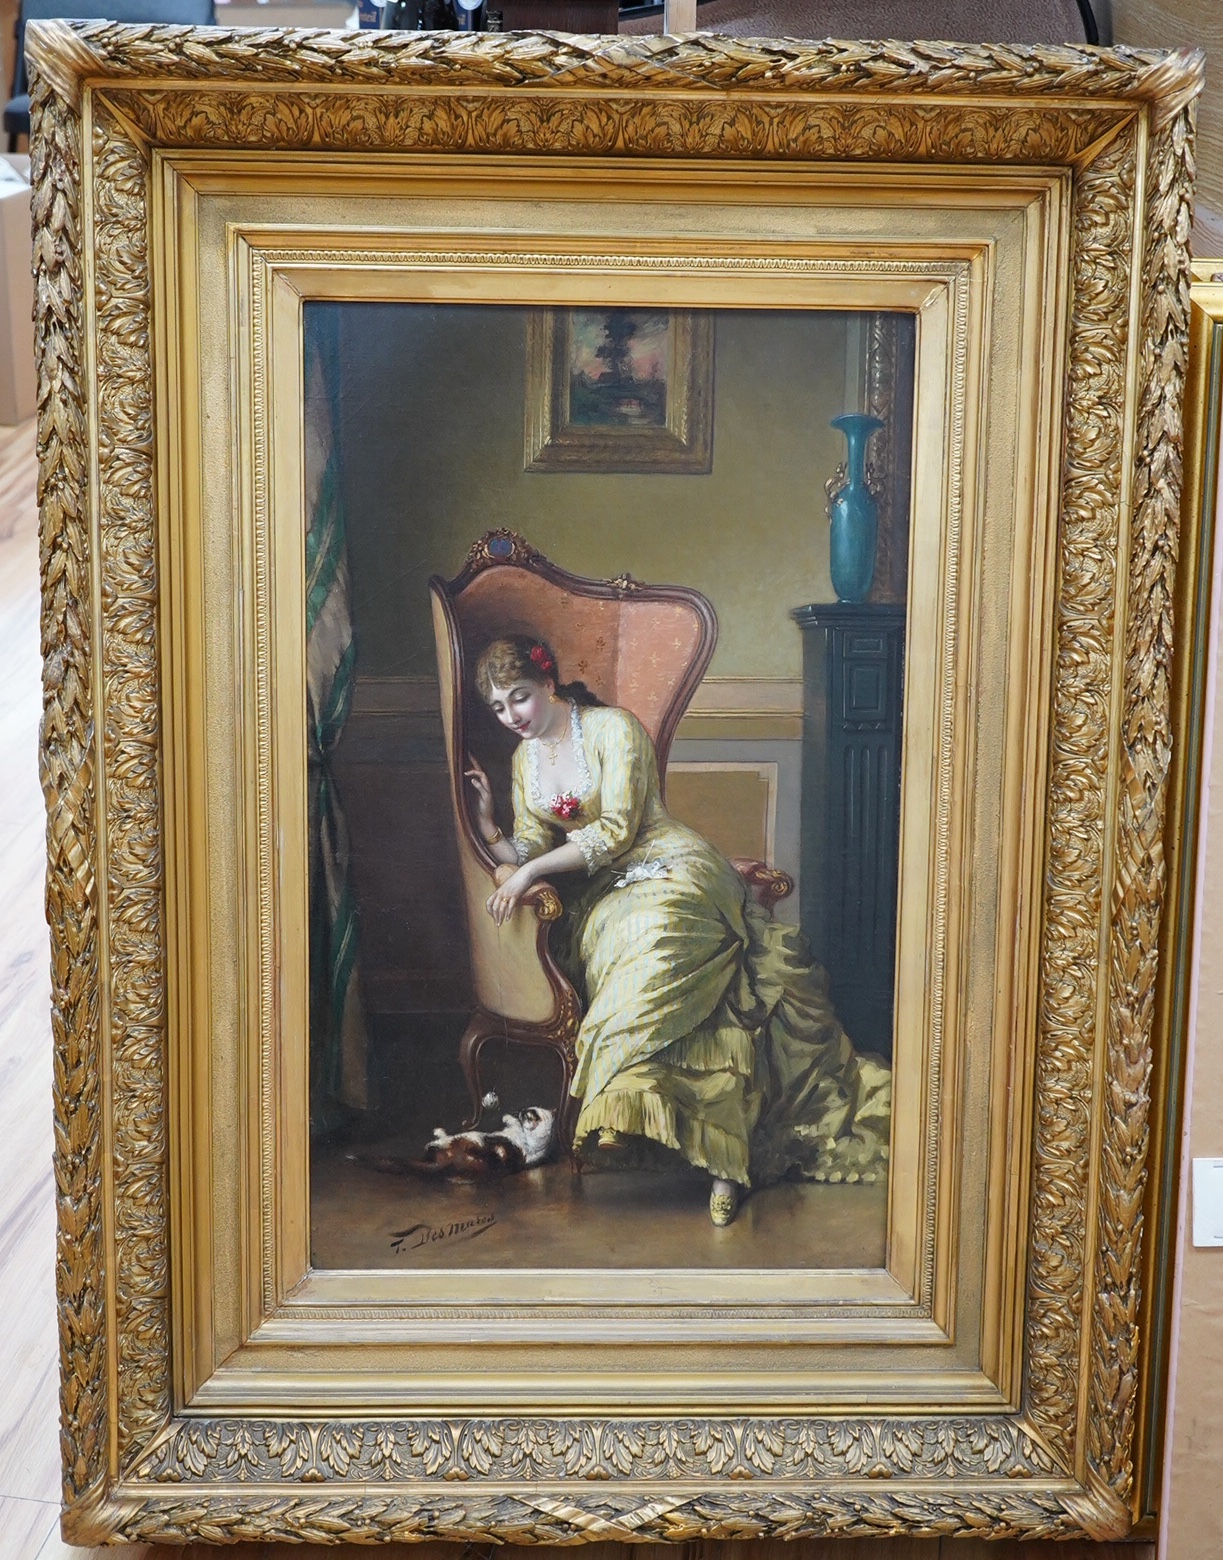 Louis Francois Desmarest (French, 1814-1882), oil on canvas, Interior scene with seated lady and cat, signed, 68 x 42cm, ornate gilt frame. Condition - good, some very minor craquelure, Provenance - Sothebys Billingshurs